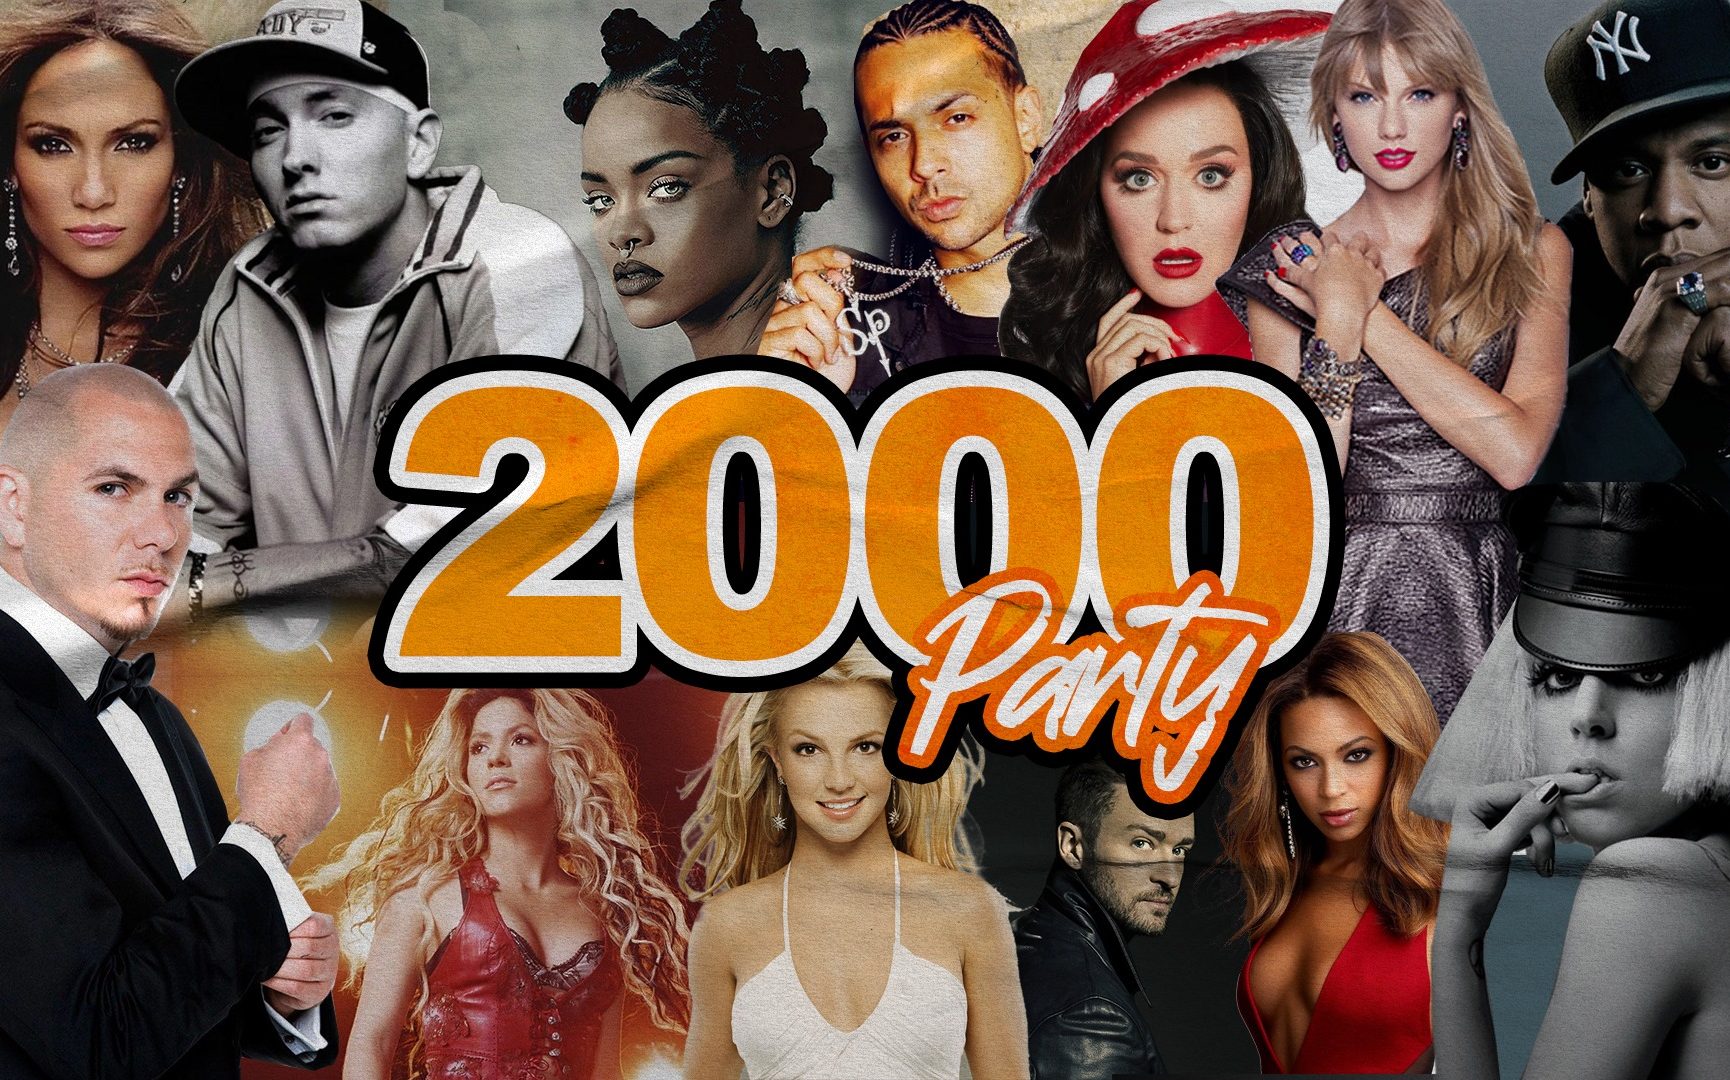 PARTY 2000